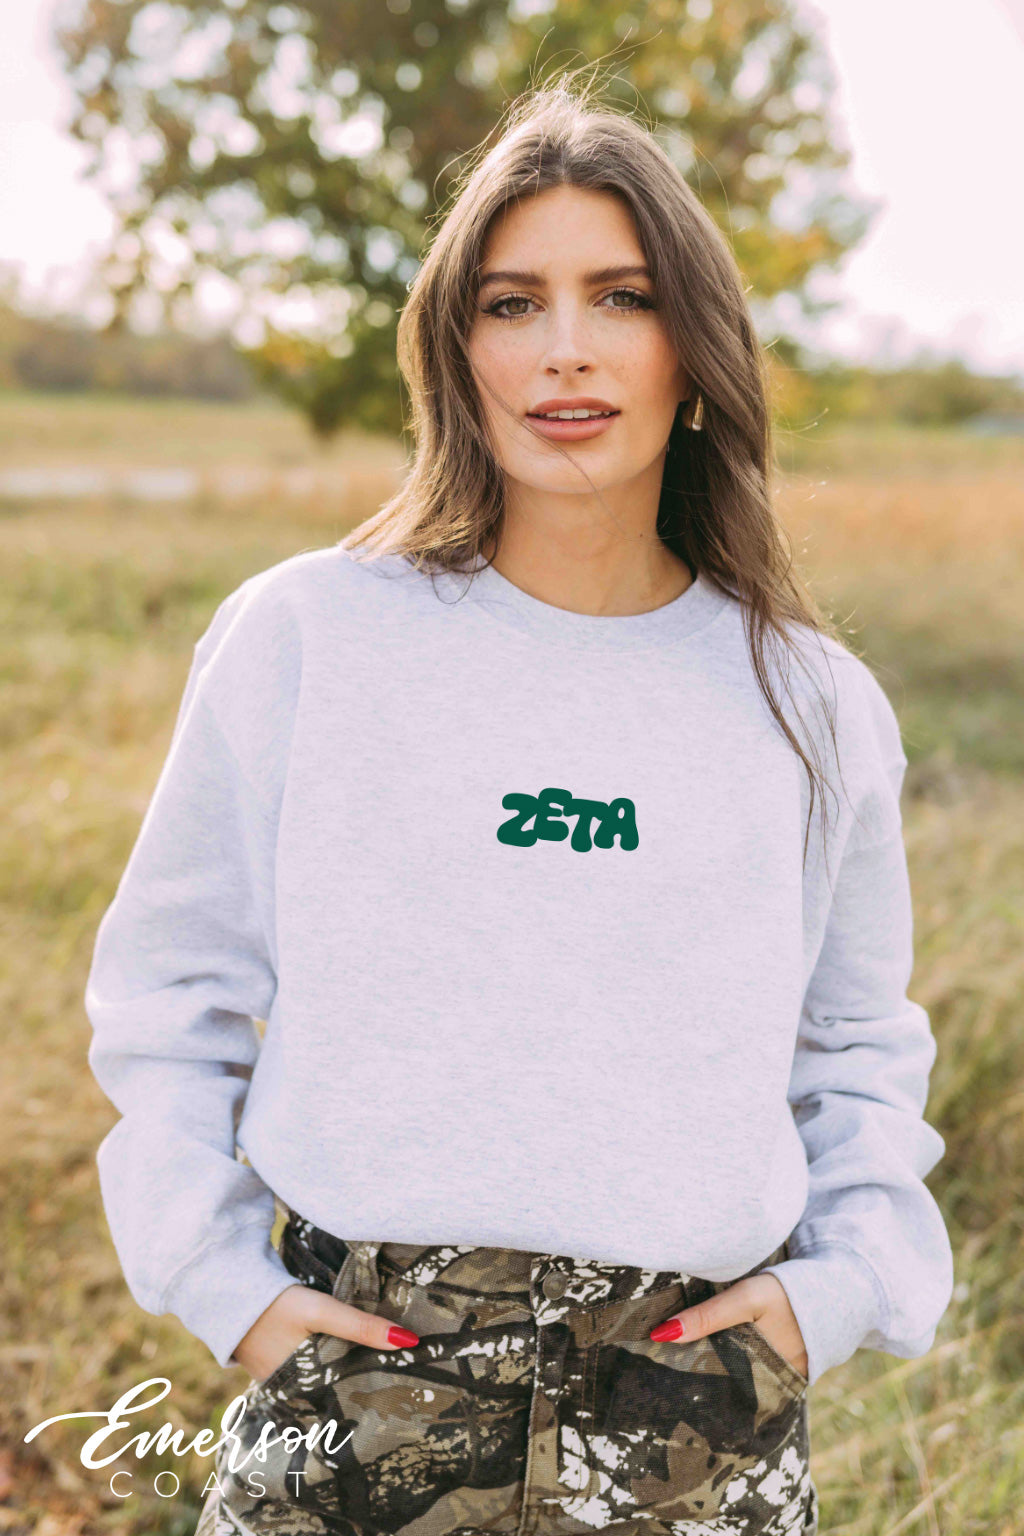 Its Giving Outdoors Crewneck